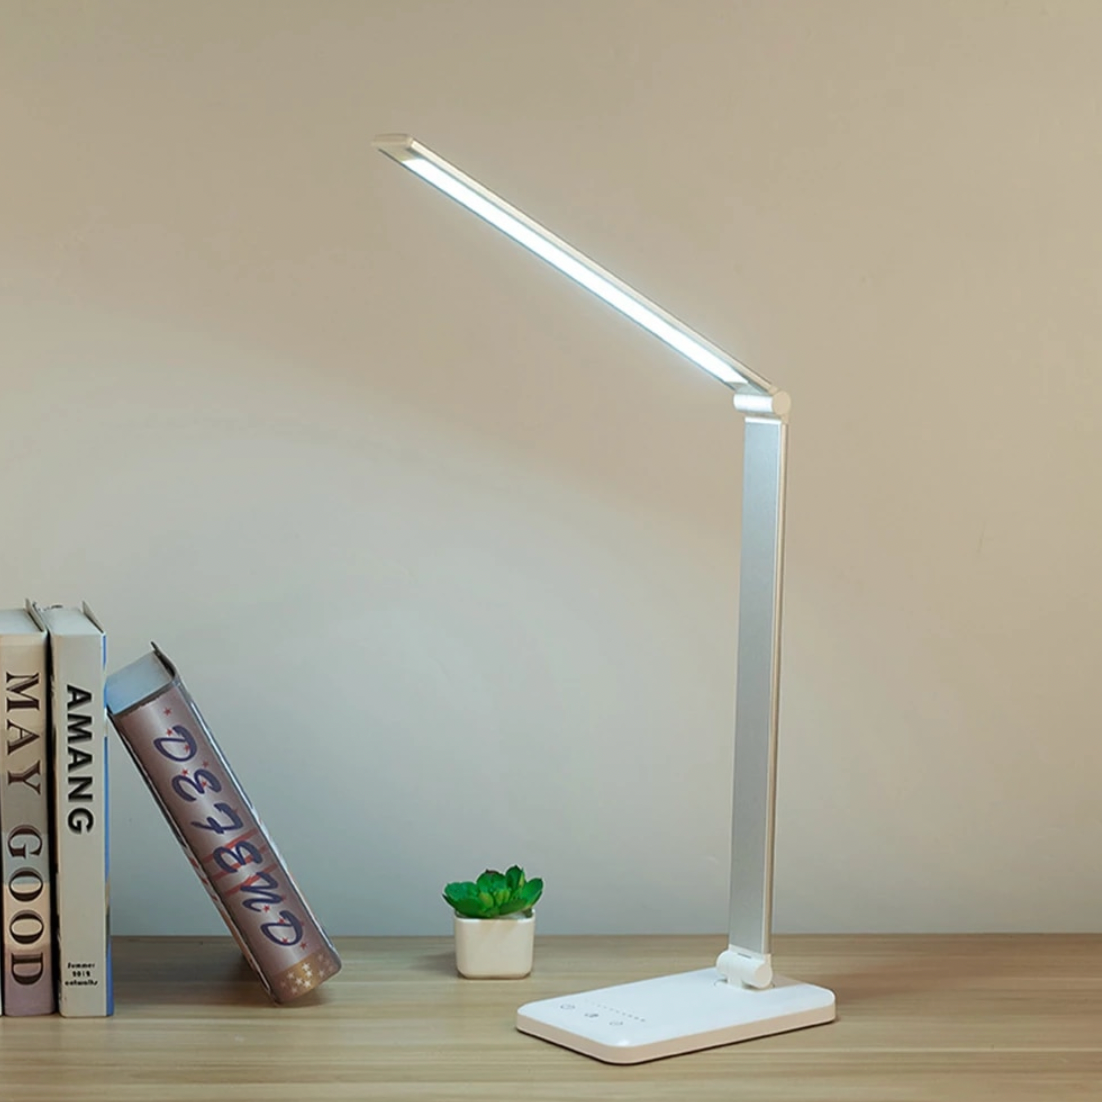 Dimmable USB Desk Lamp and Reading Light - Silver